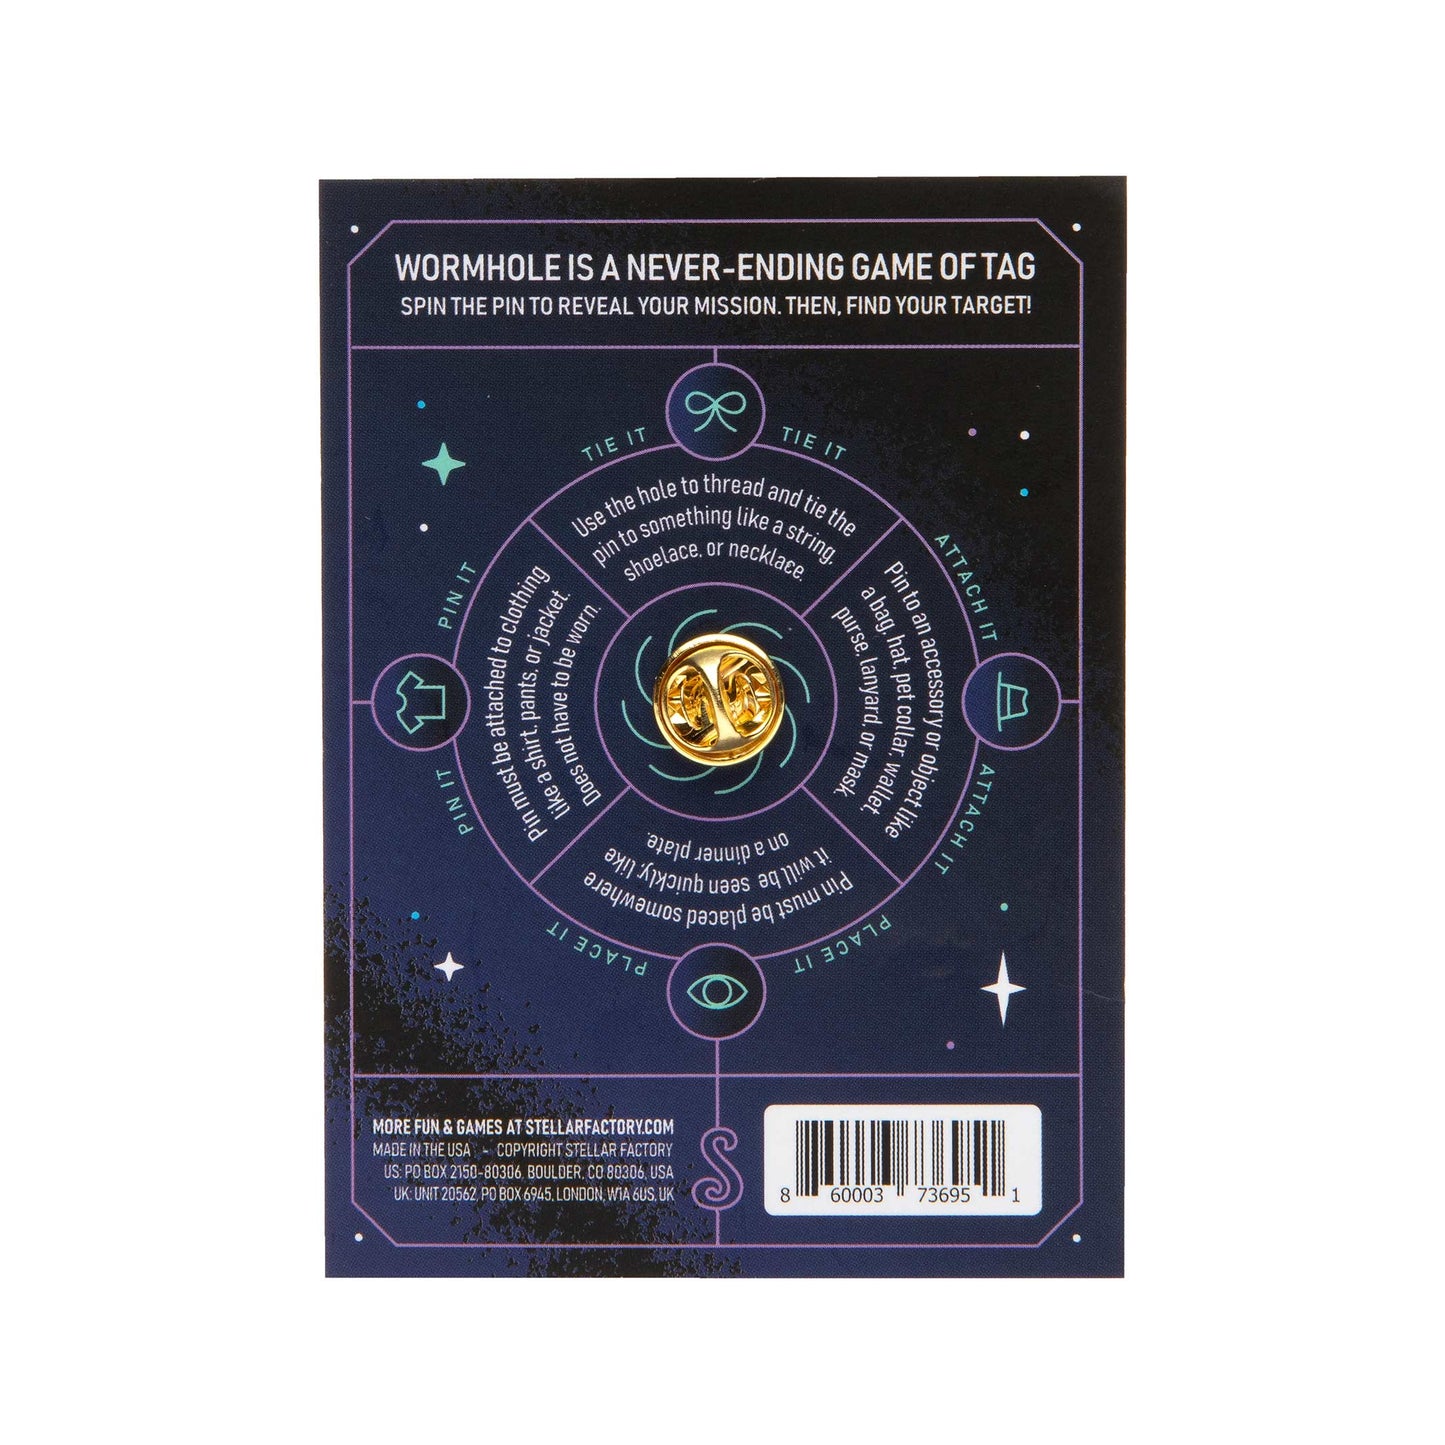 Game - Wormhole: A Perpetual Pin Game